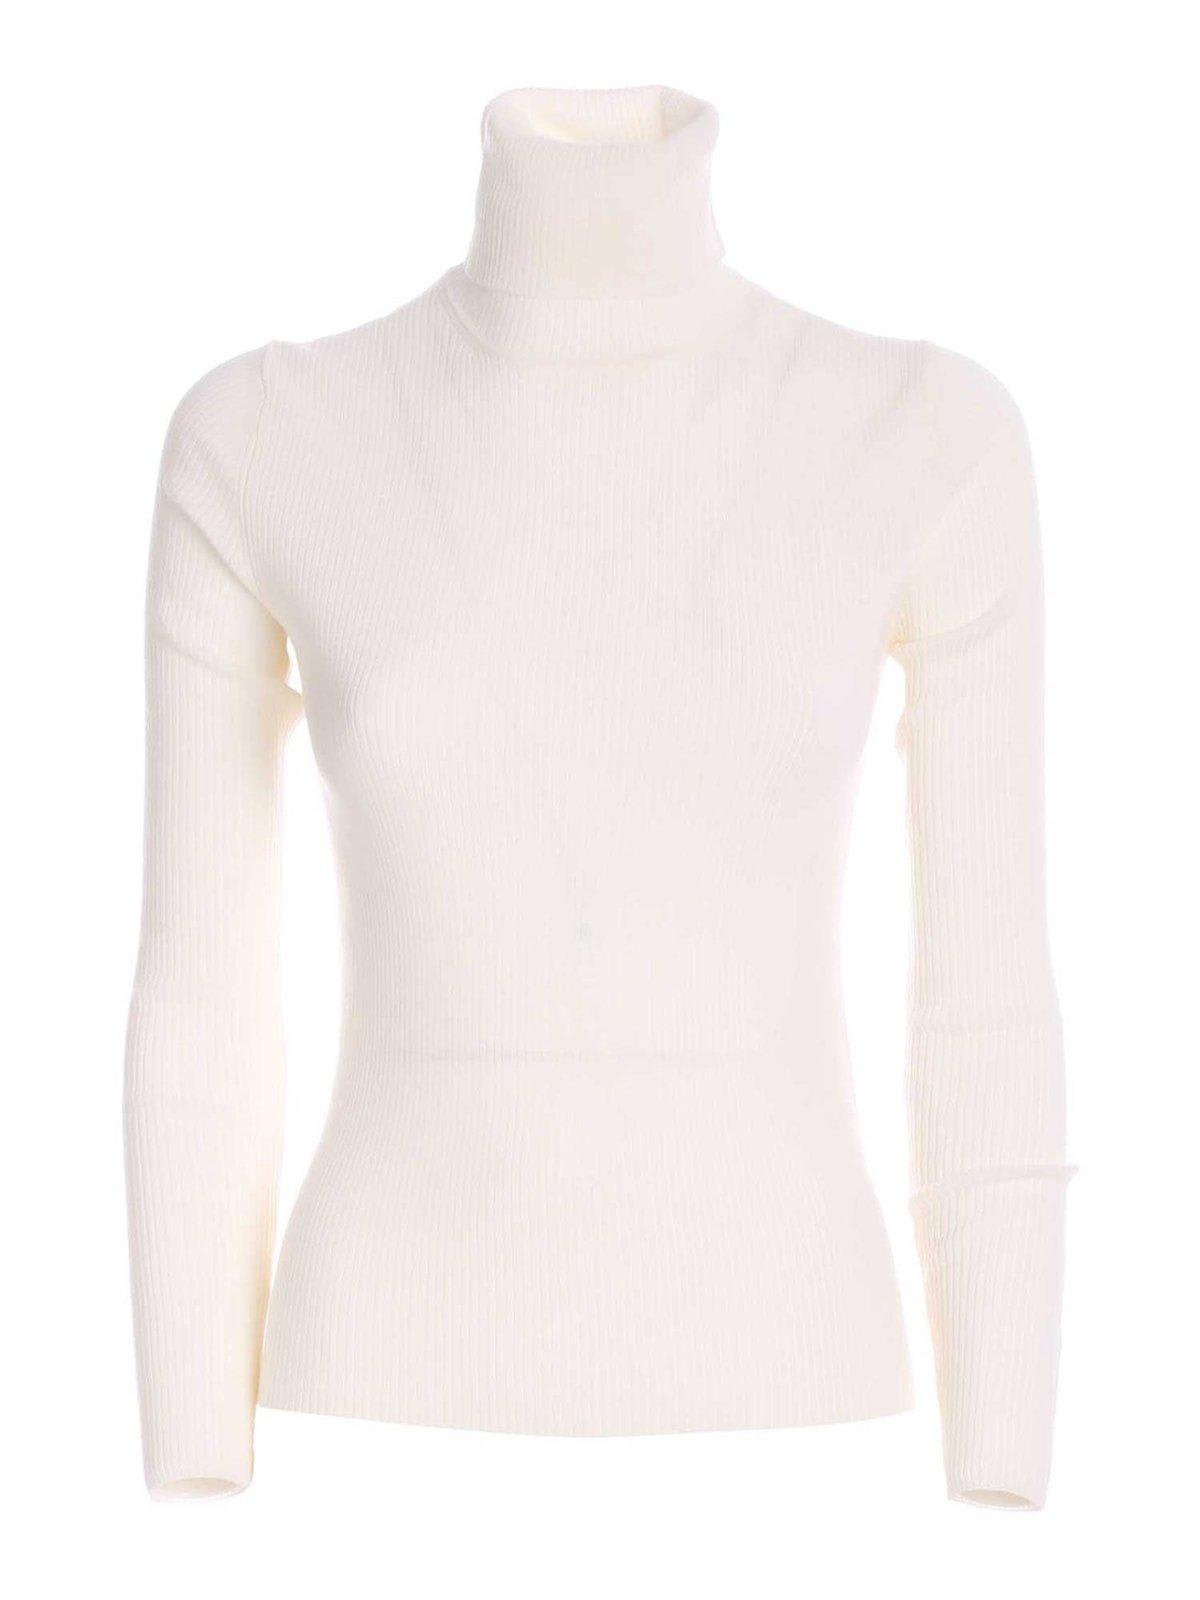 P.A.R.O.S.H TURTLENECK KNITTED JUMPER